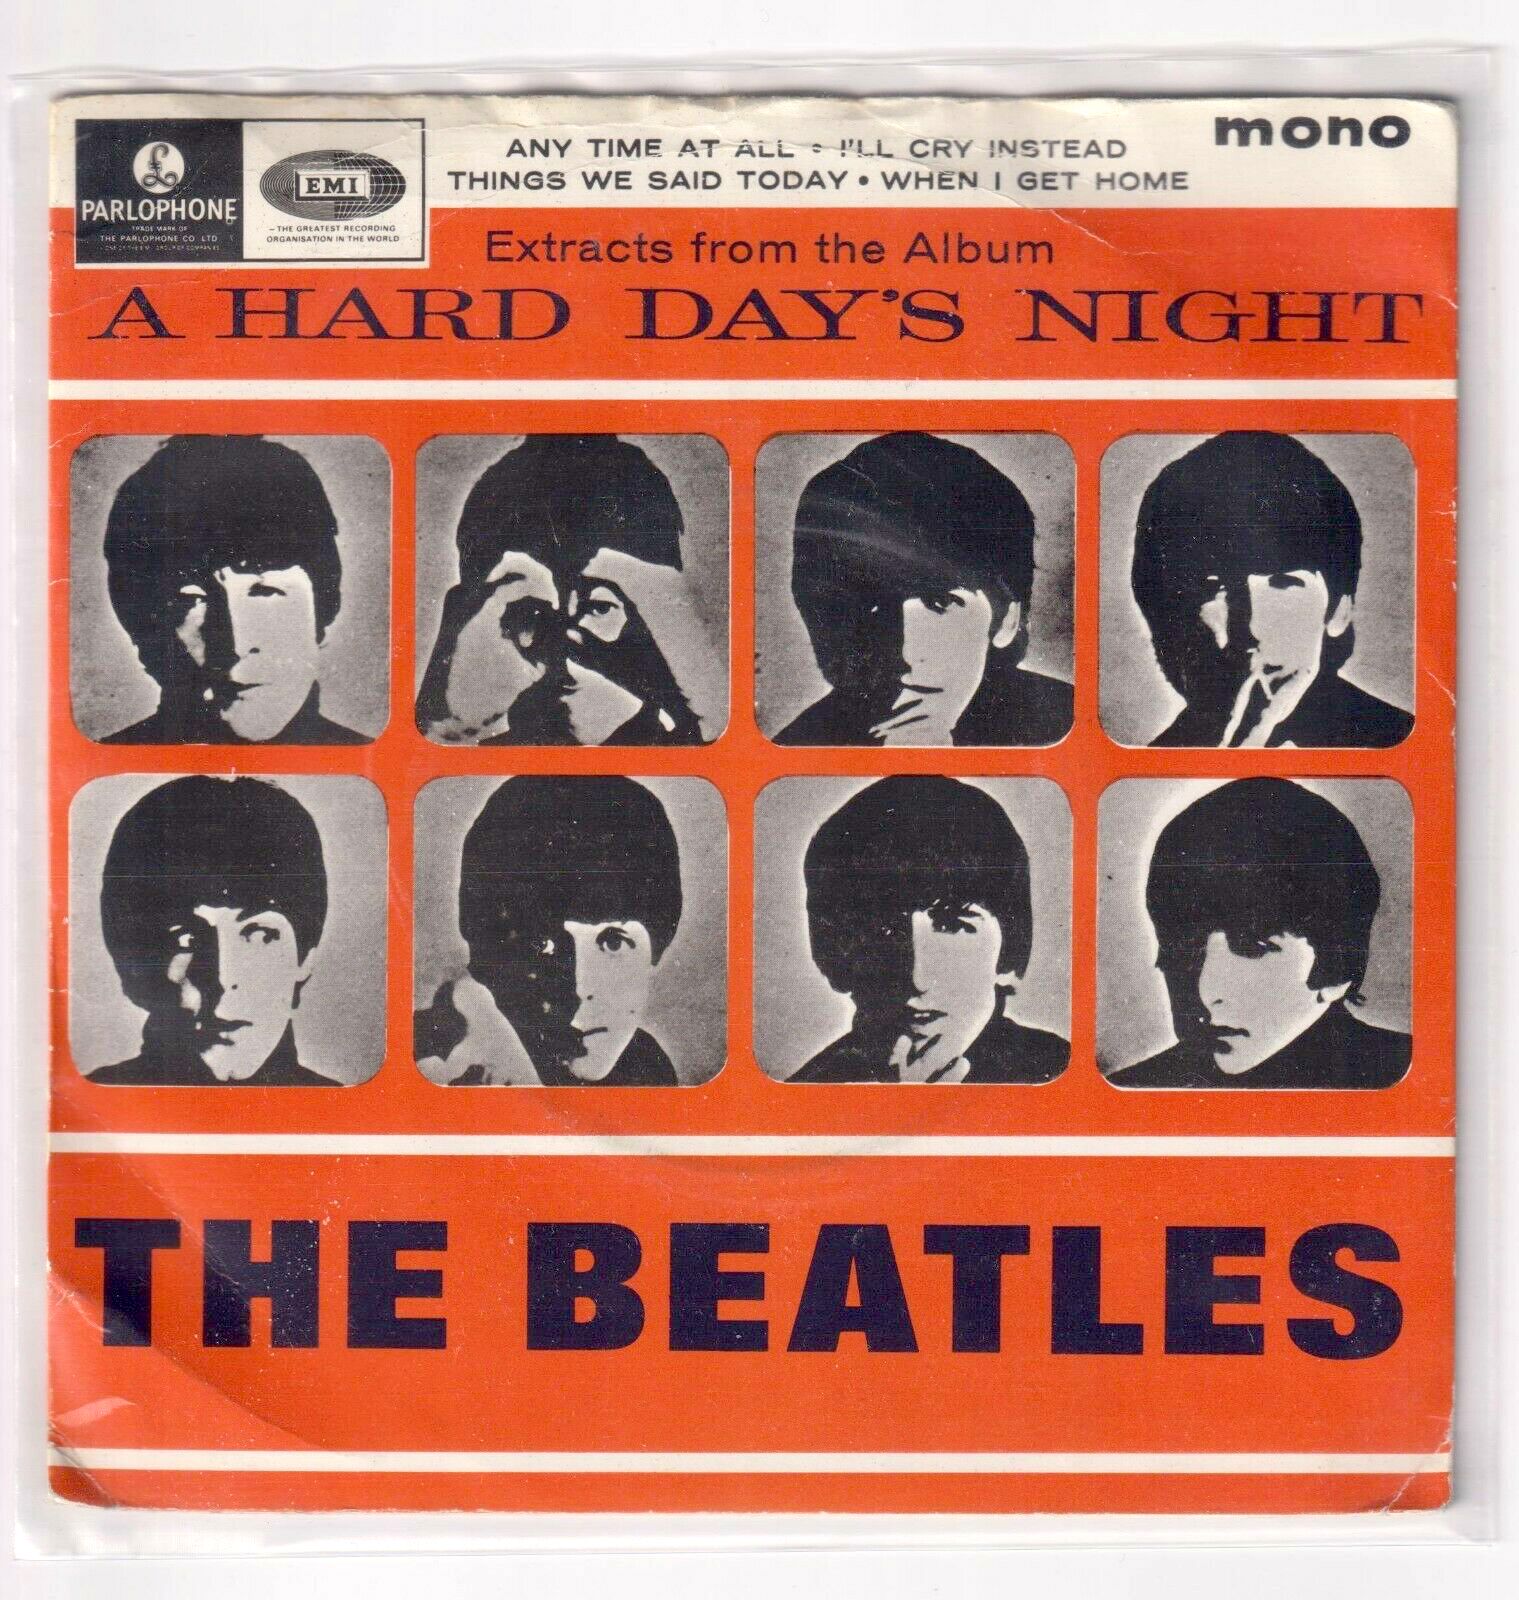 The beatles a hard day s night. The Beatles a hard Day's Night альбом. The Beatles a hard Day's Night 1964. The Beatles a hard Day's Night обложка. The Beatles a hard Day's Night 1964 альбом.